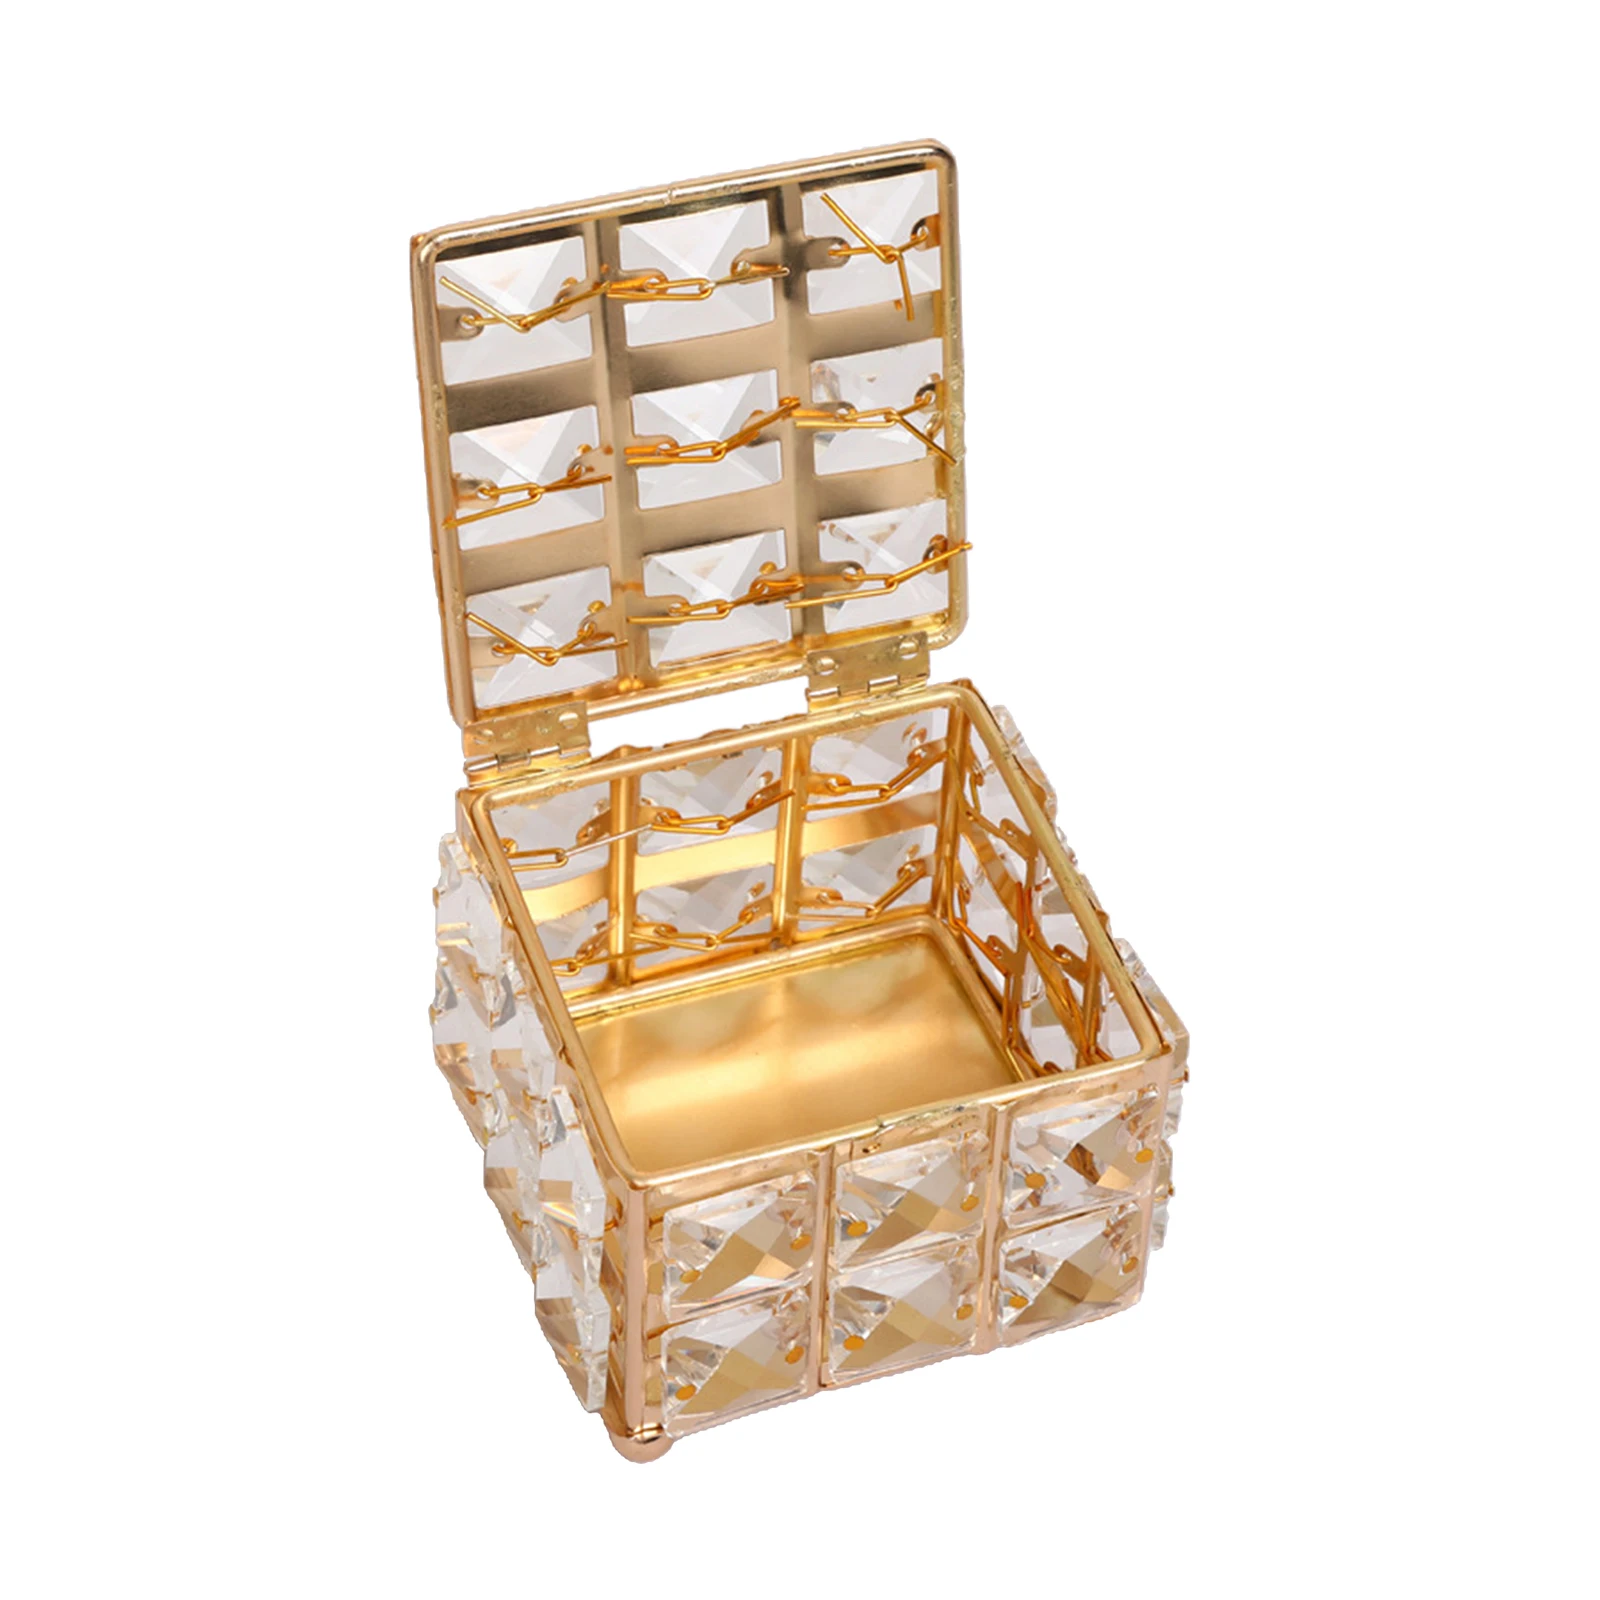 Gold Crystal Jewelry Box with Lid Necklace Trinket Souvenir From